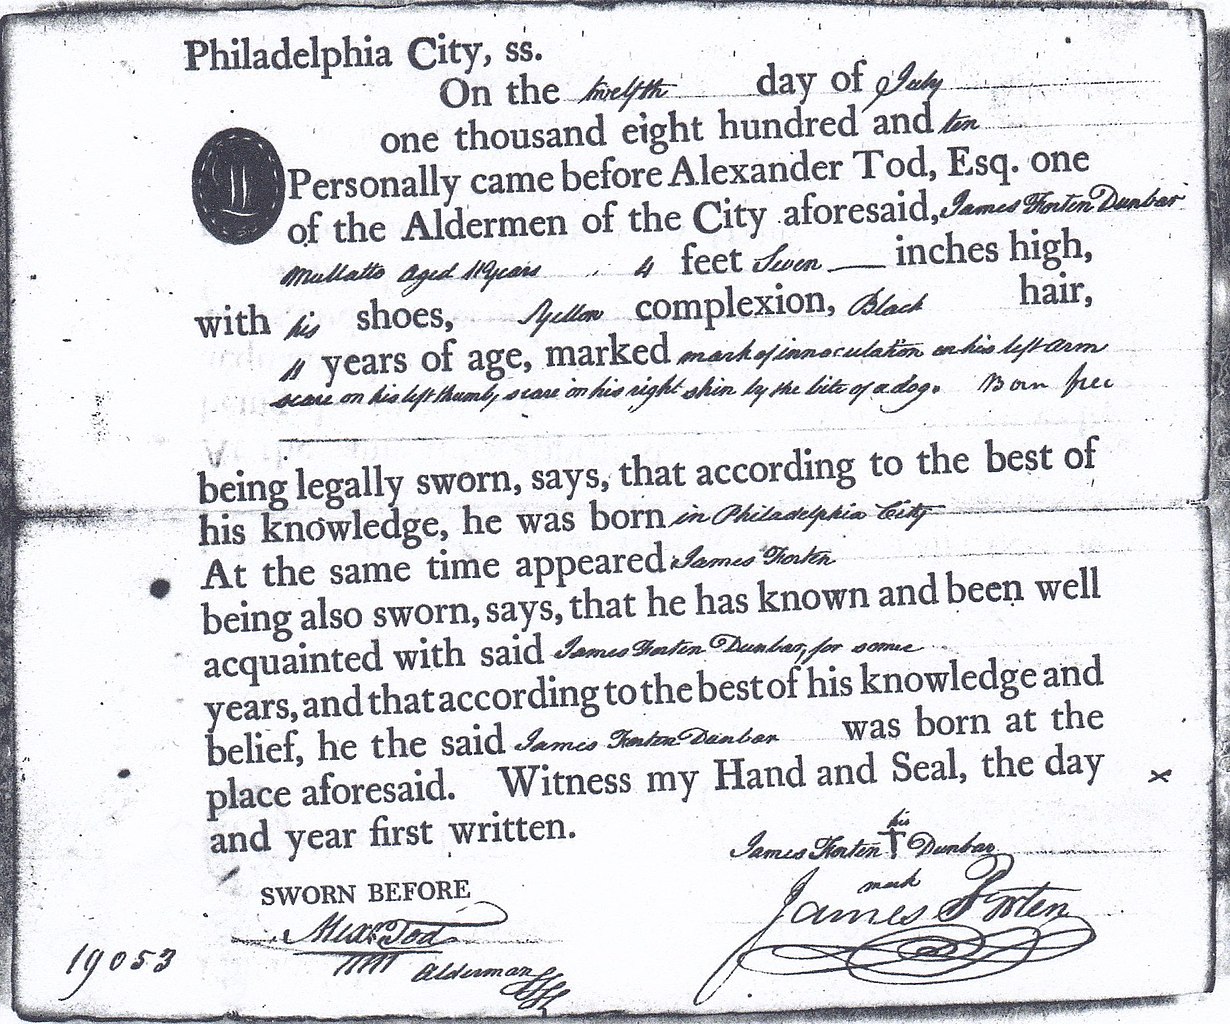 File:Seaman's Protection Certificate issued to James Forten Dunbar